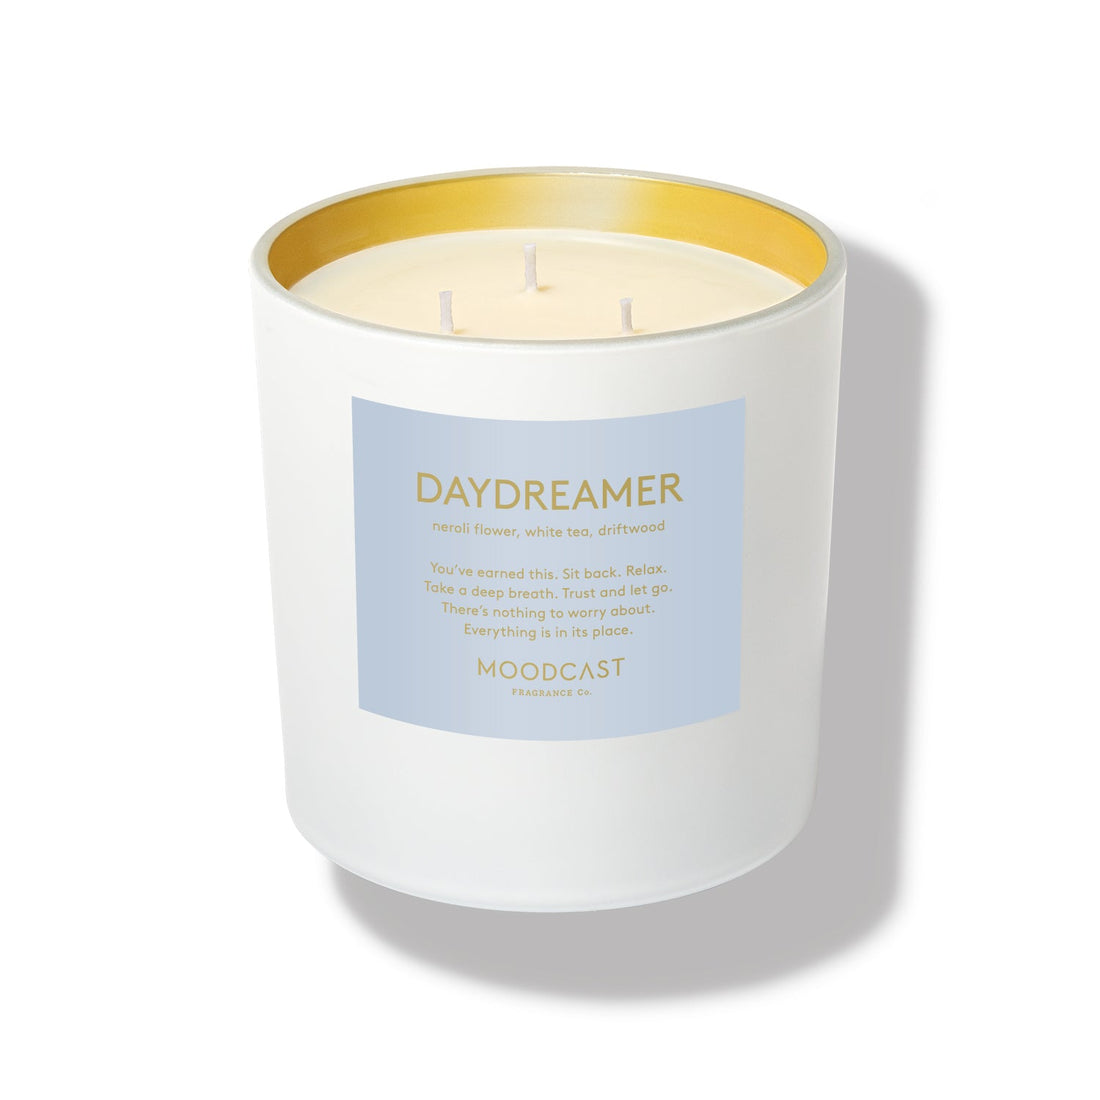 Daydreamer - Persona Collection (White & Gold) - 24oz/680g Coconut Wax Blend Glass Jar 3-Wick Candle - Key Notes: Neroli Flower, White Tea, Driftwood